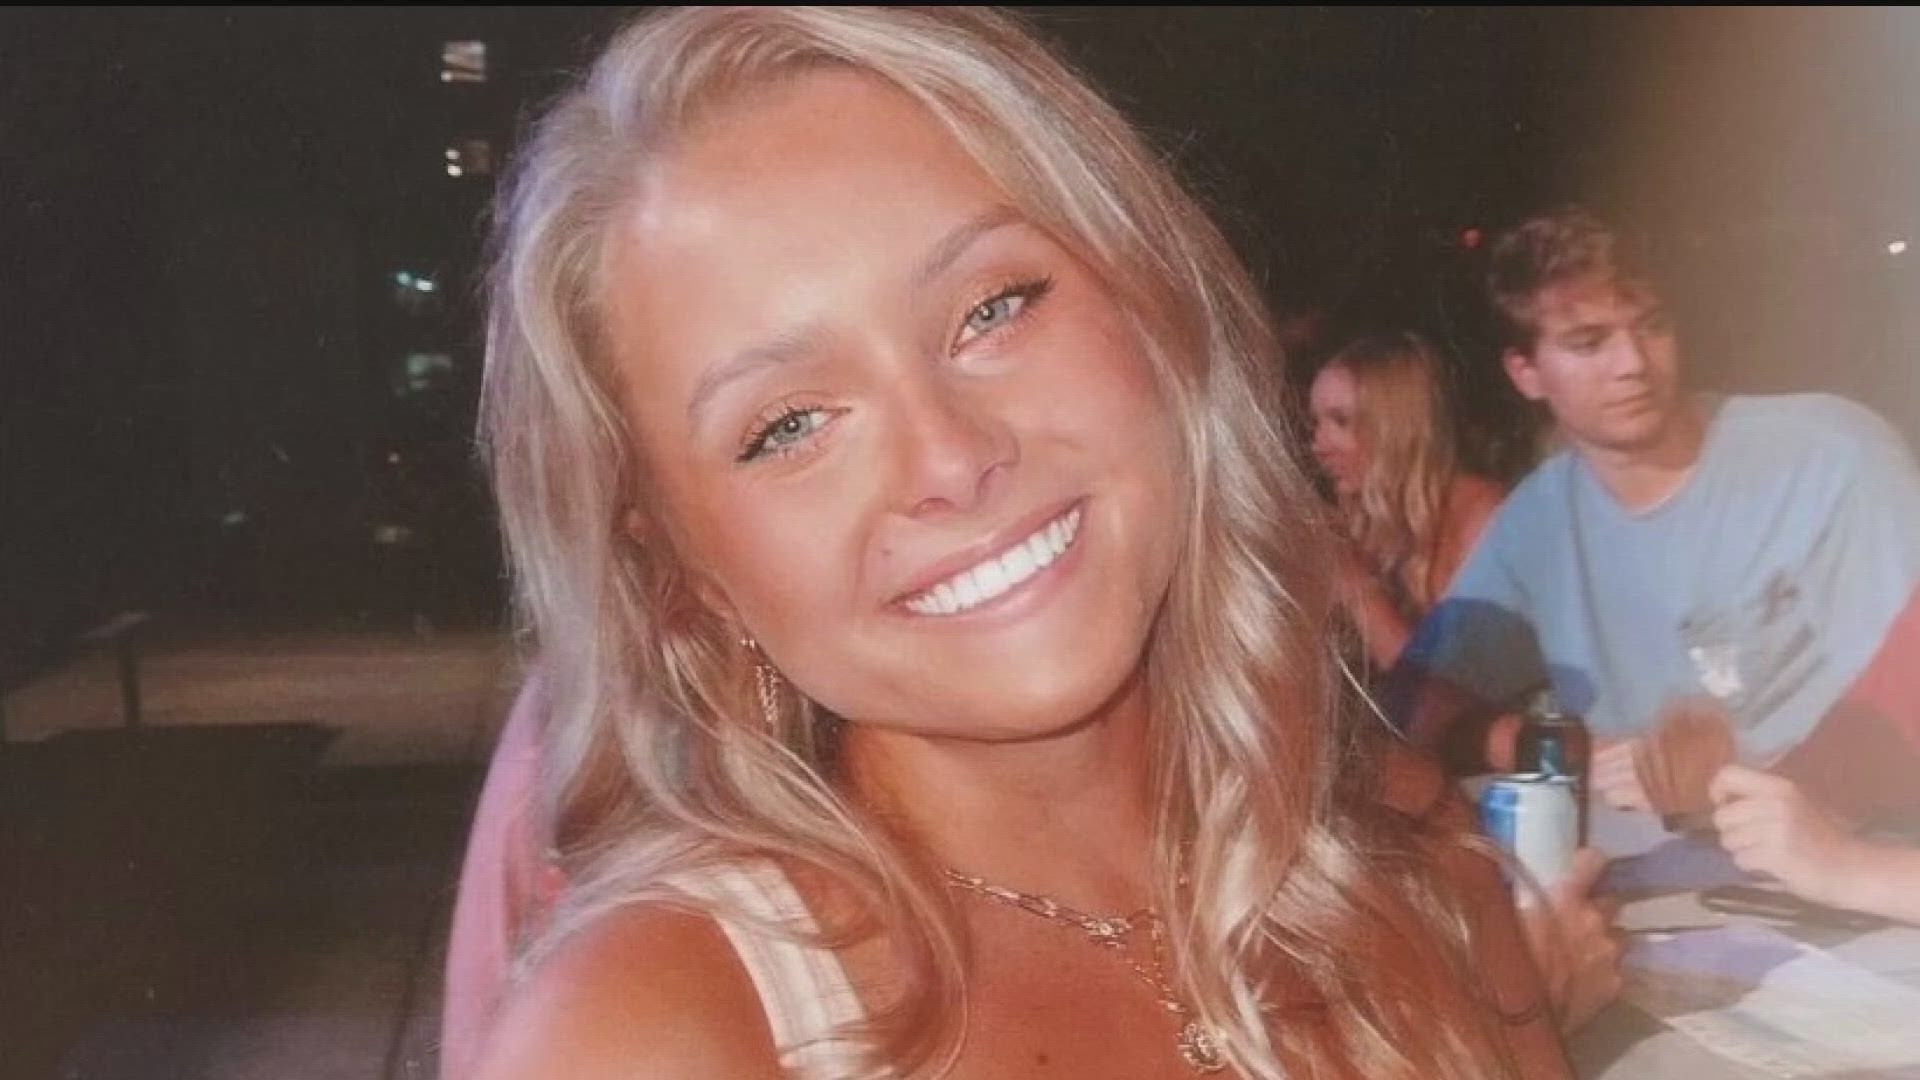 A tragic update for UGA student Liza Burke. Her family said they are stopping her radiation treatment so she can spend her final days in peace.